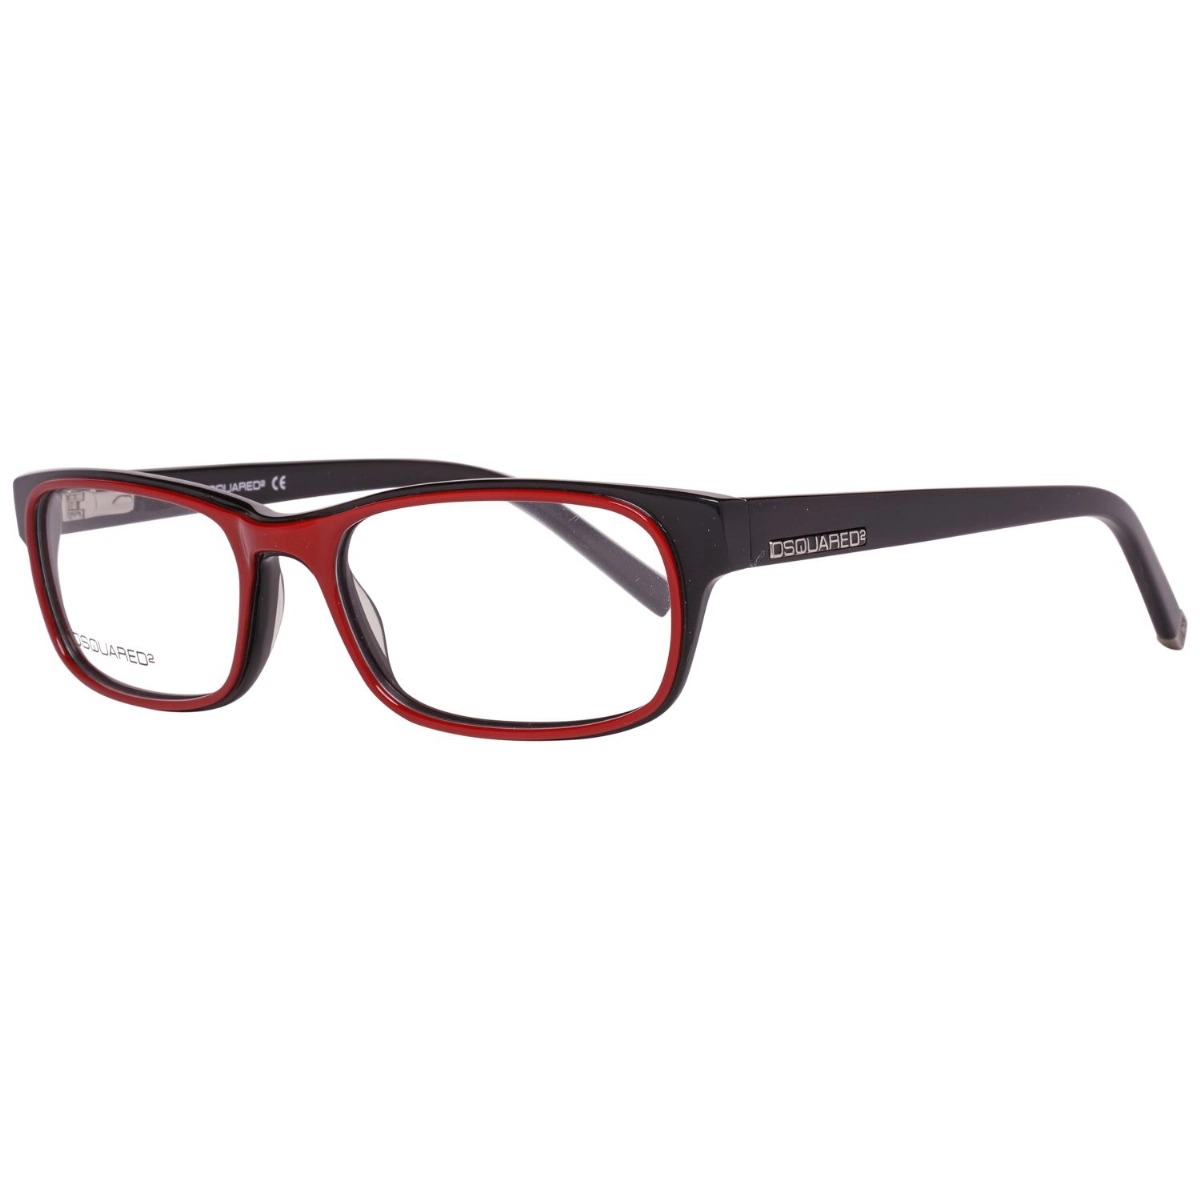 GLASSES FOR WOMAN DSQUARED2 DQ5009-068-52